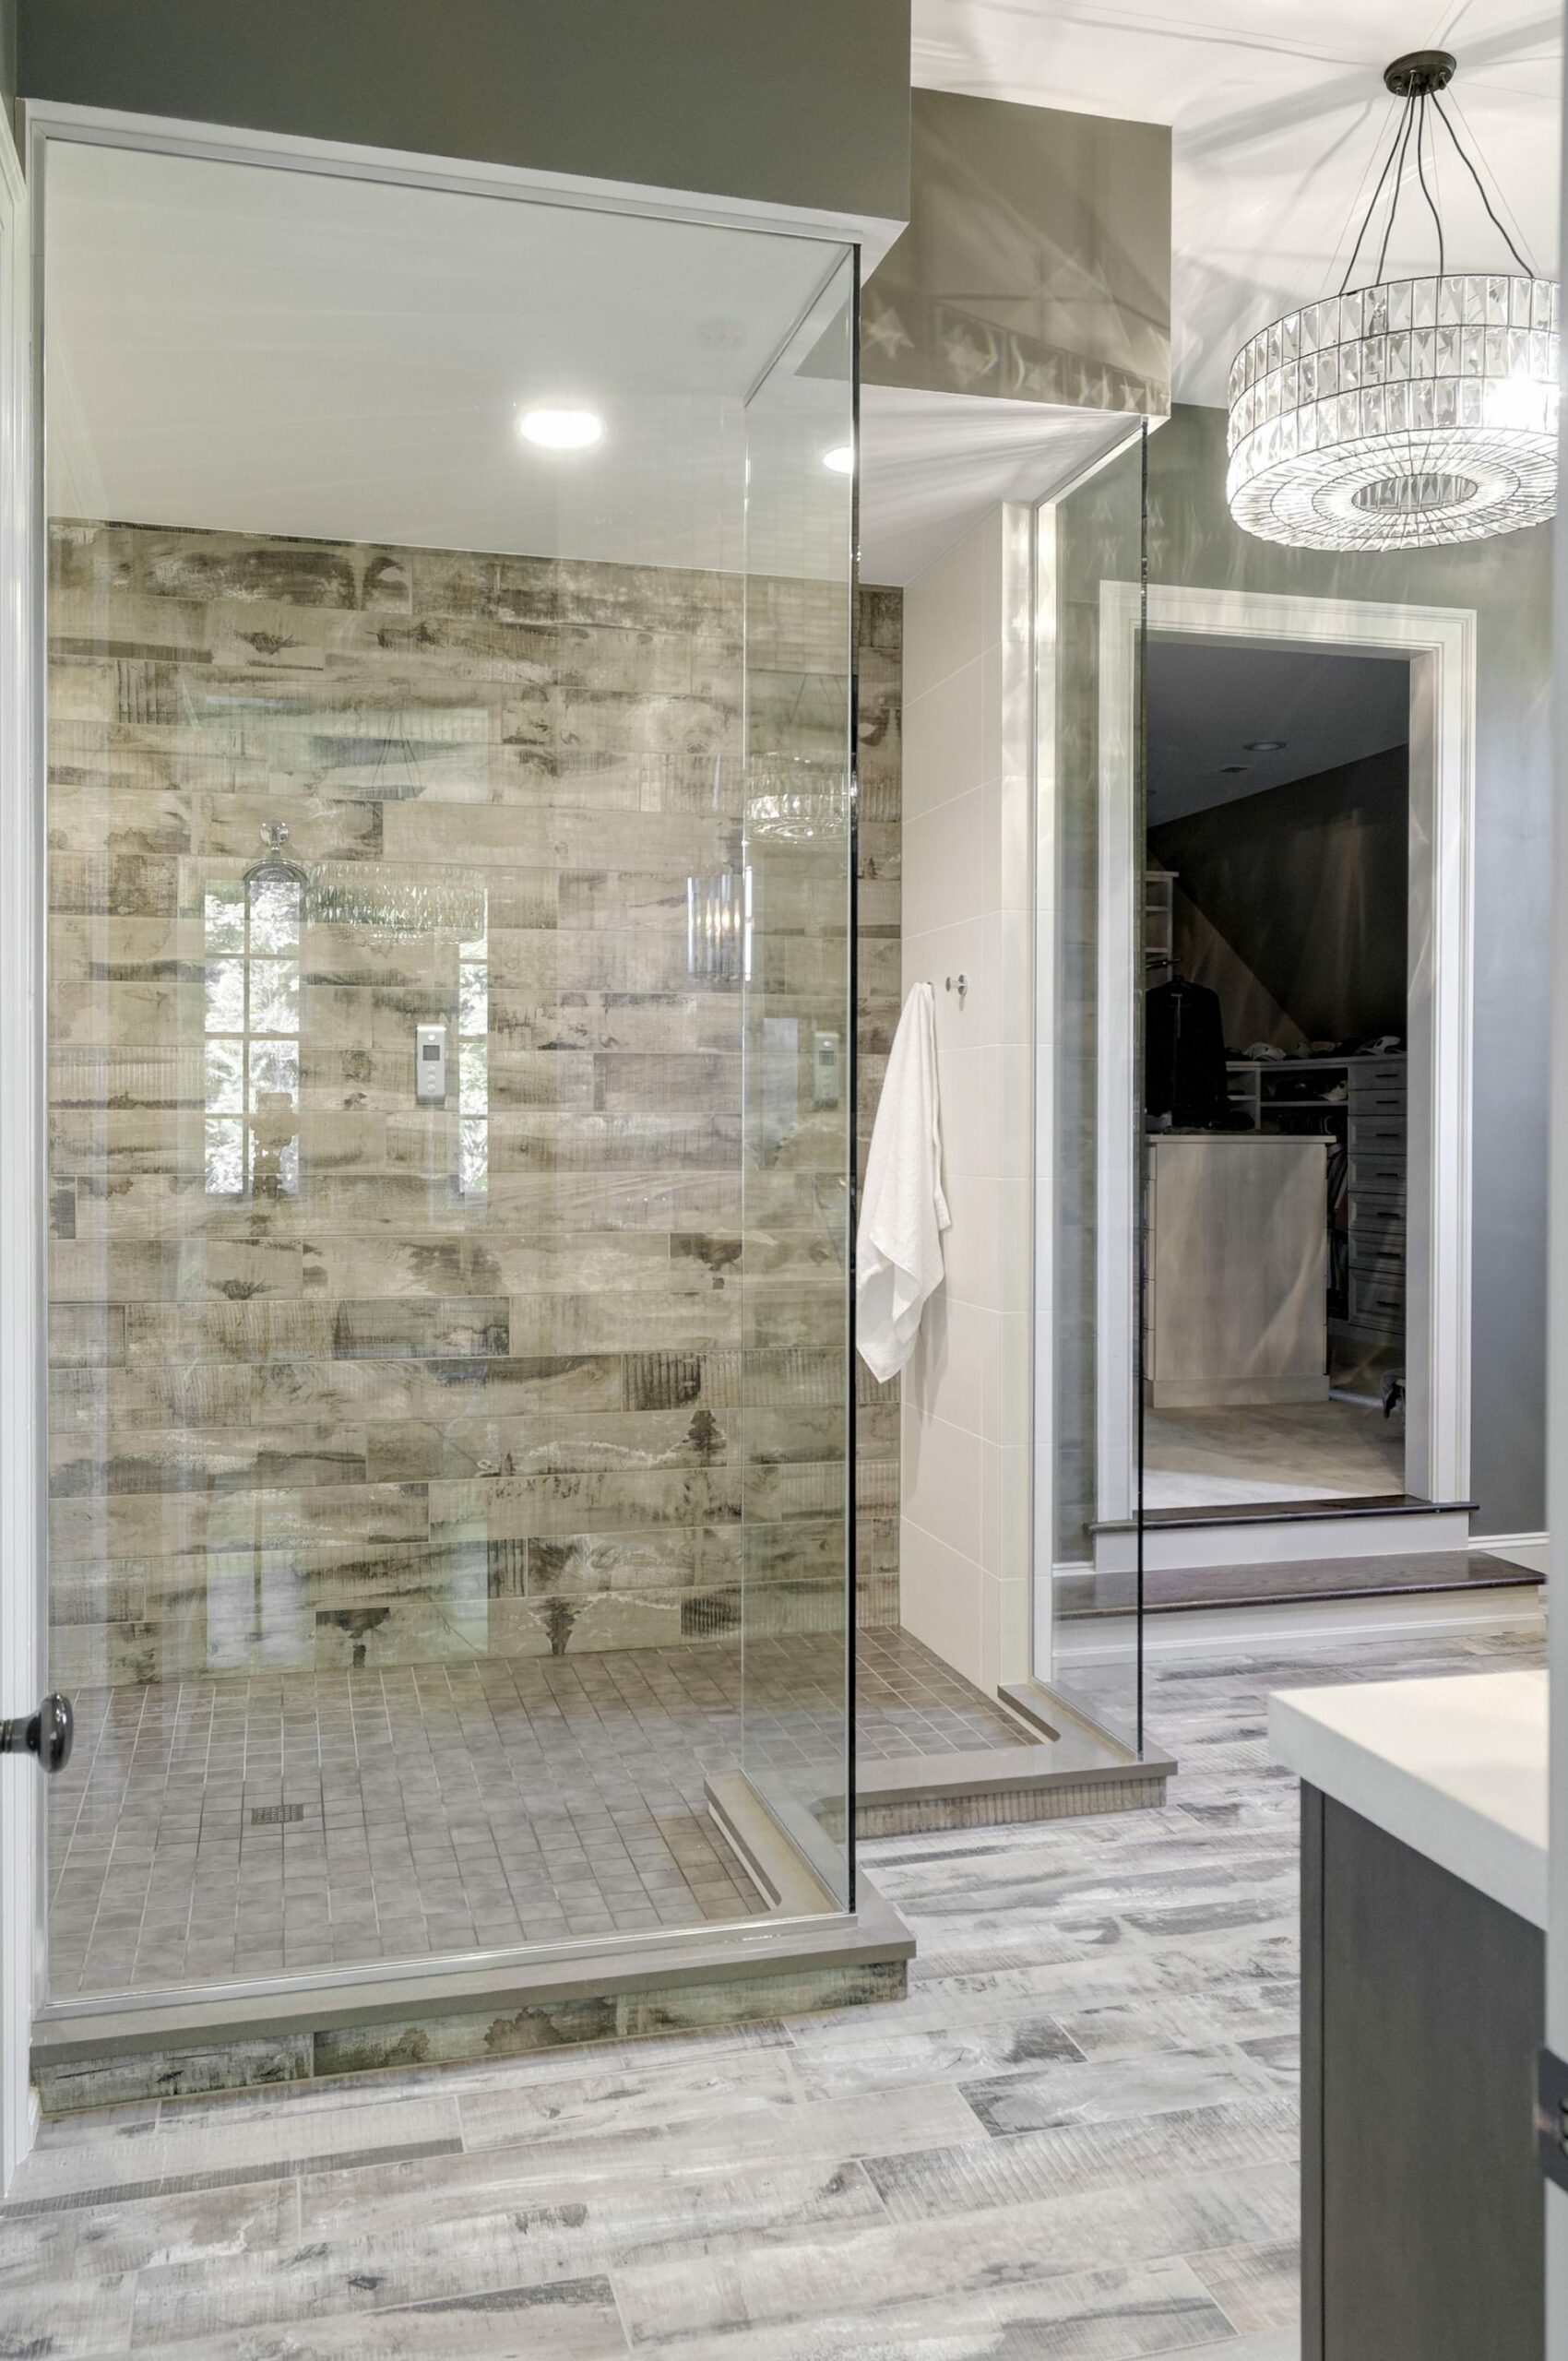 Bathroom Shower Remodeling Ideas Dave Fox, How To Remodel Bathroom Shower